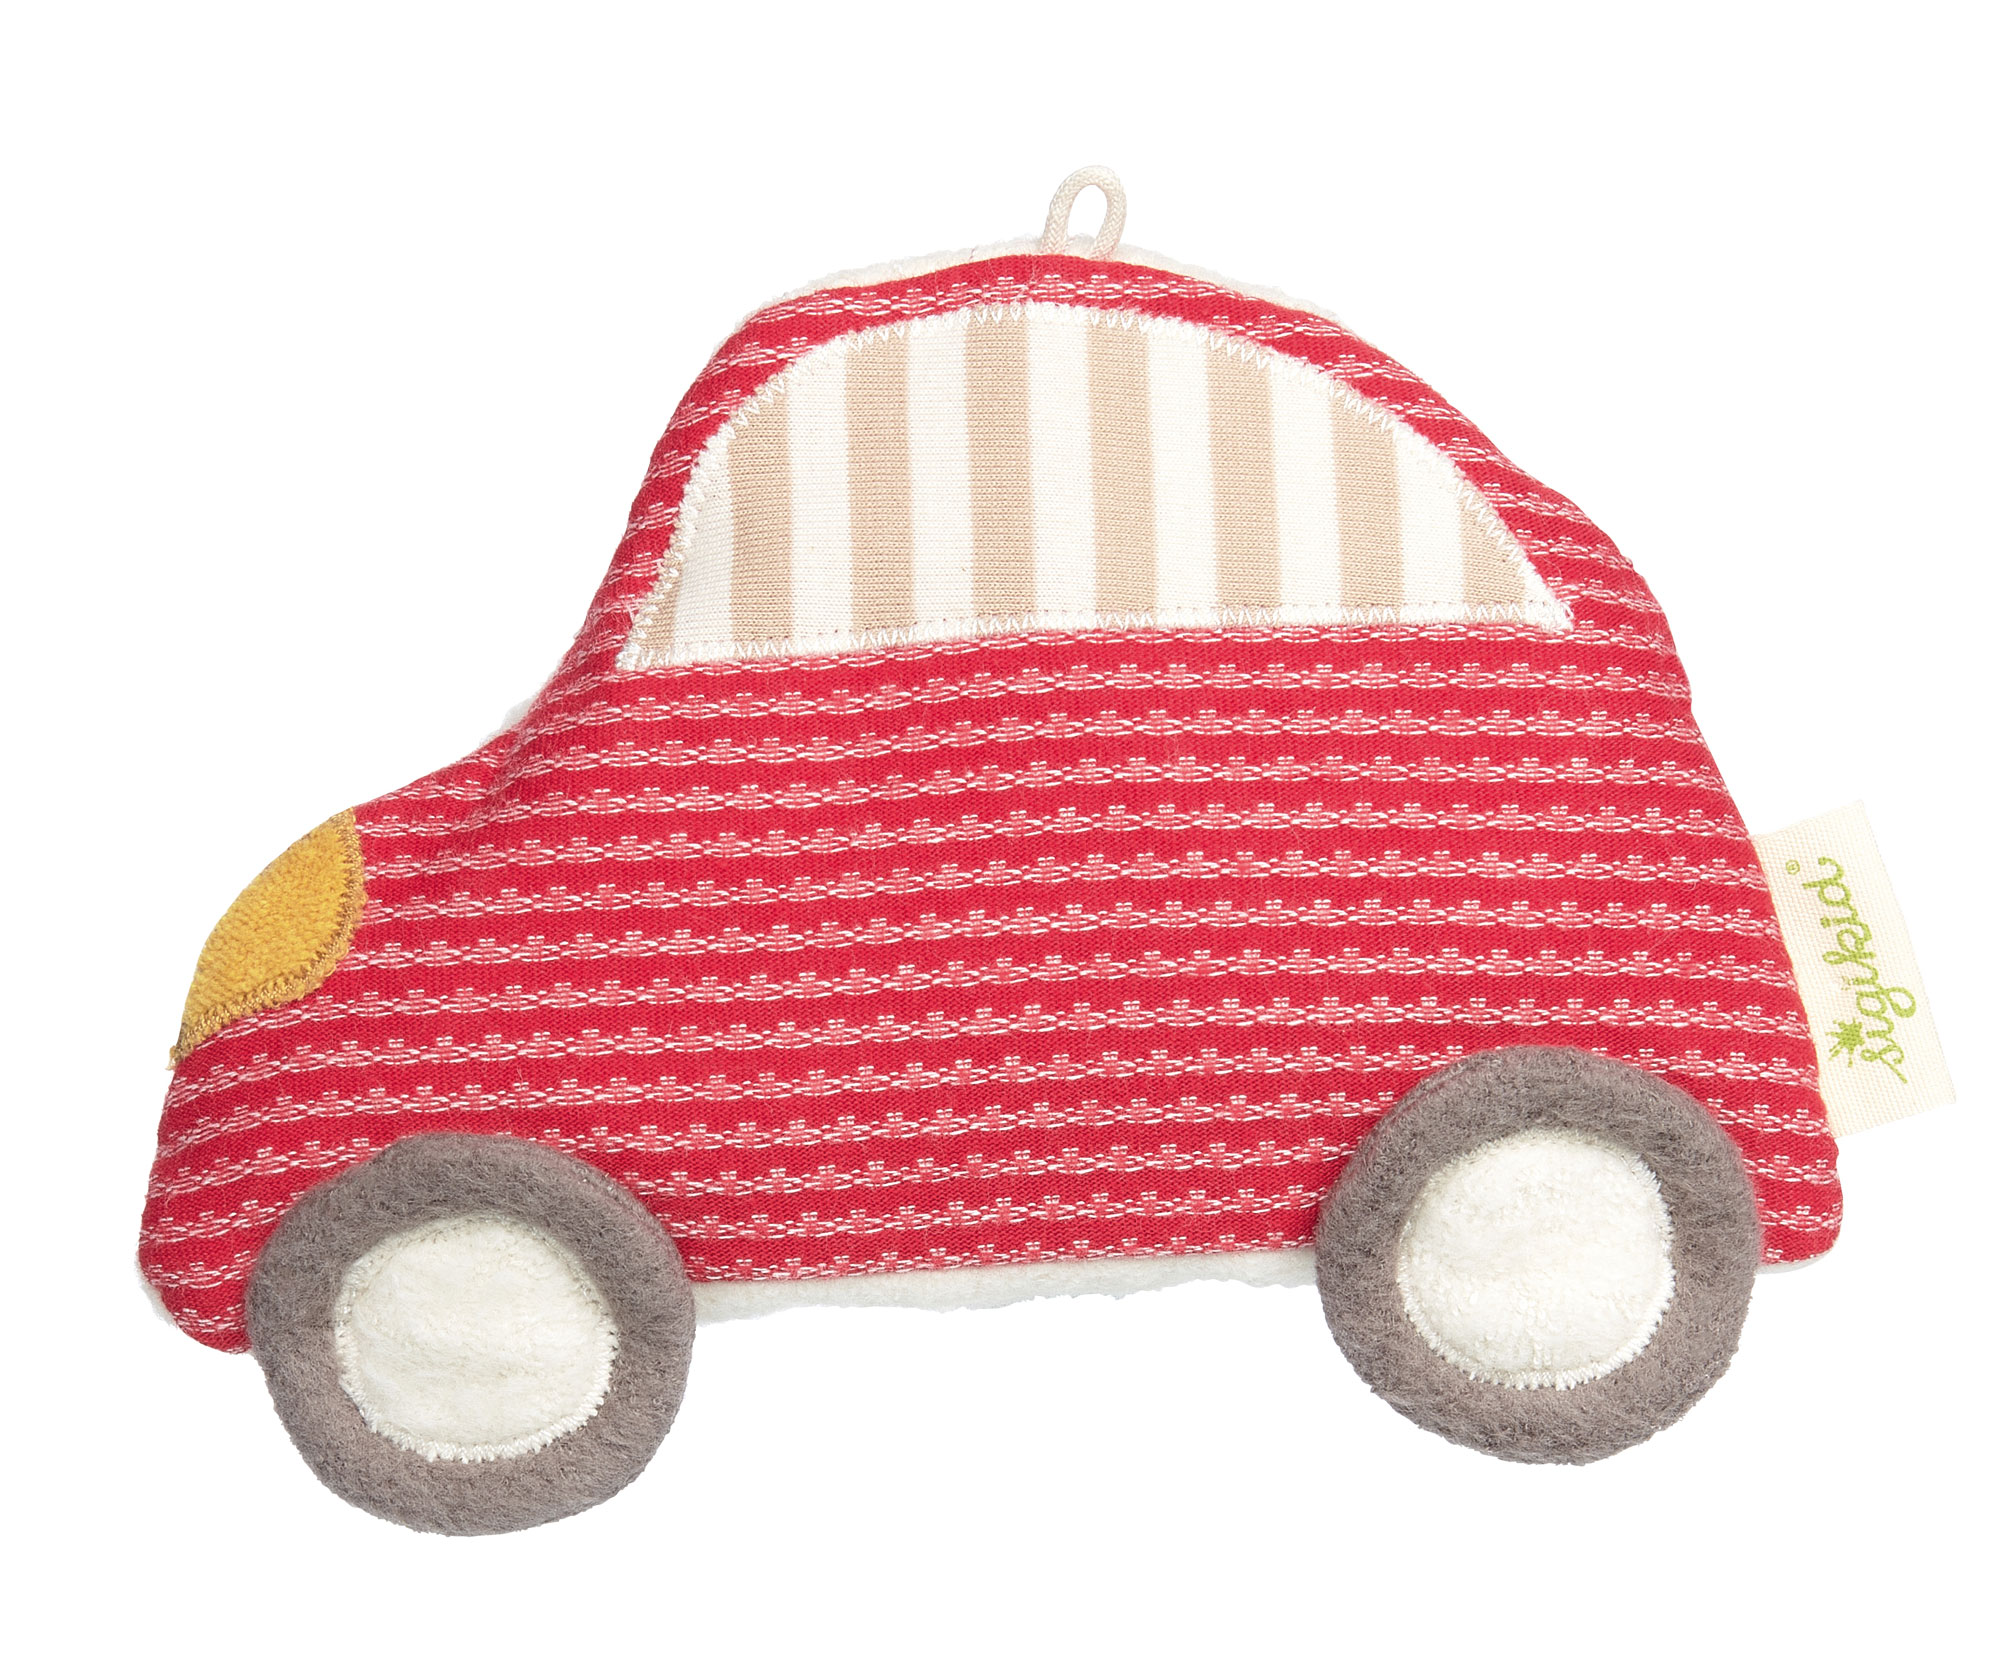 Baby car cushion with cherry pit filling, organic